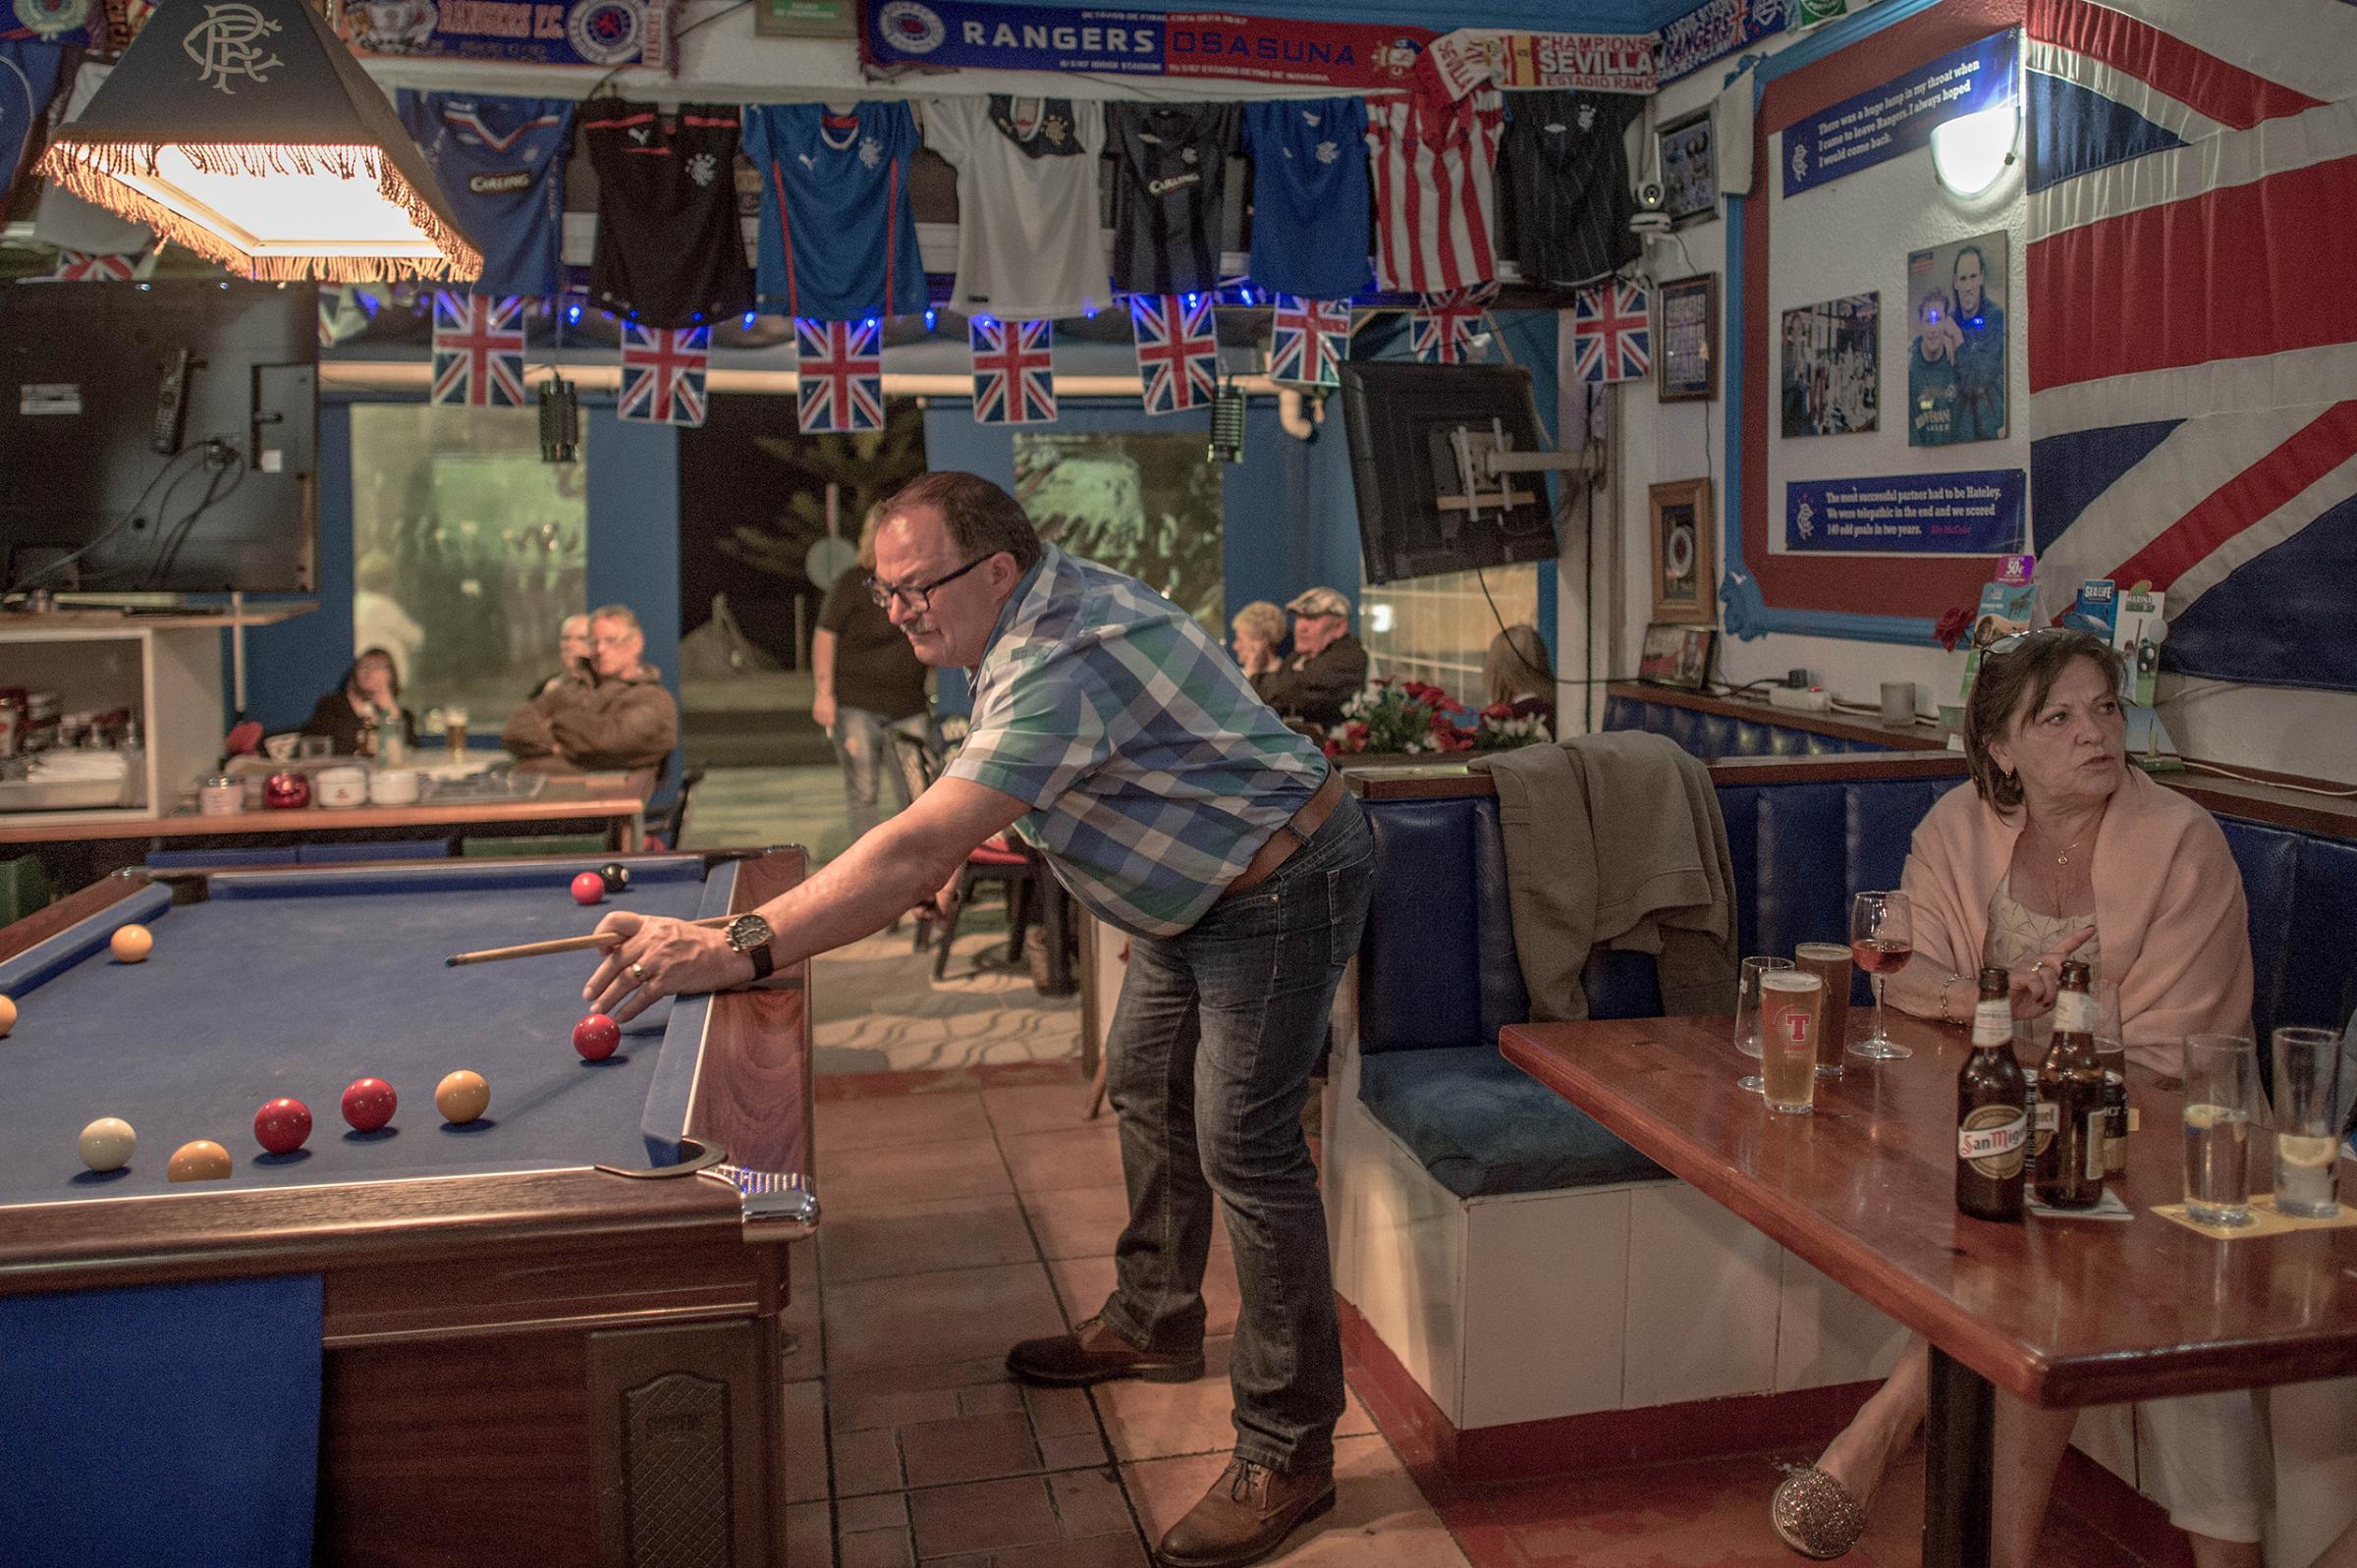 British tourists play pool at a English bar in Benalmadena, Spain, on March 17, 2016. Spain is Europe's top destination for British expats.